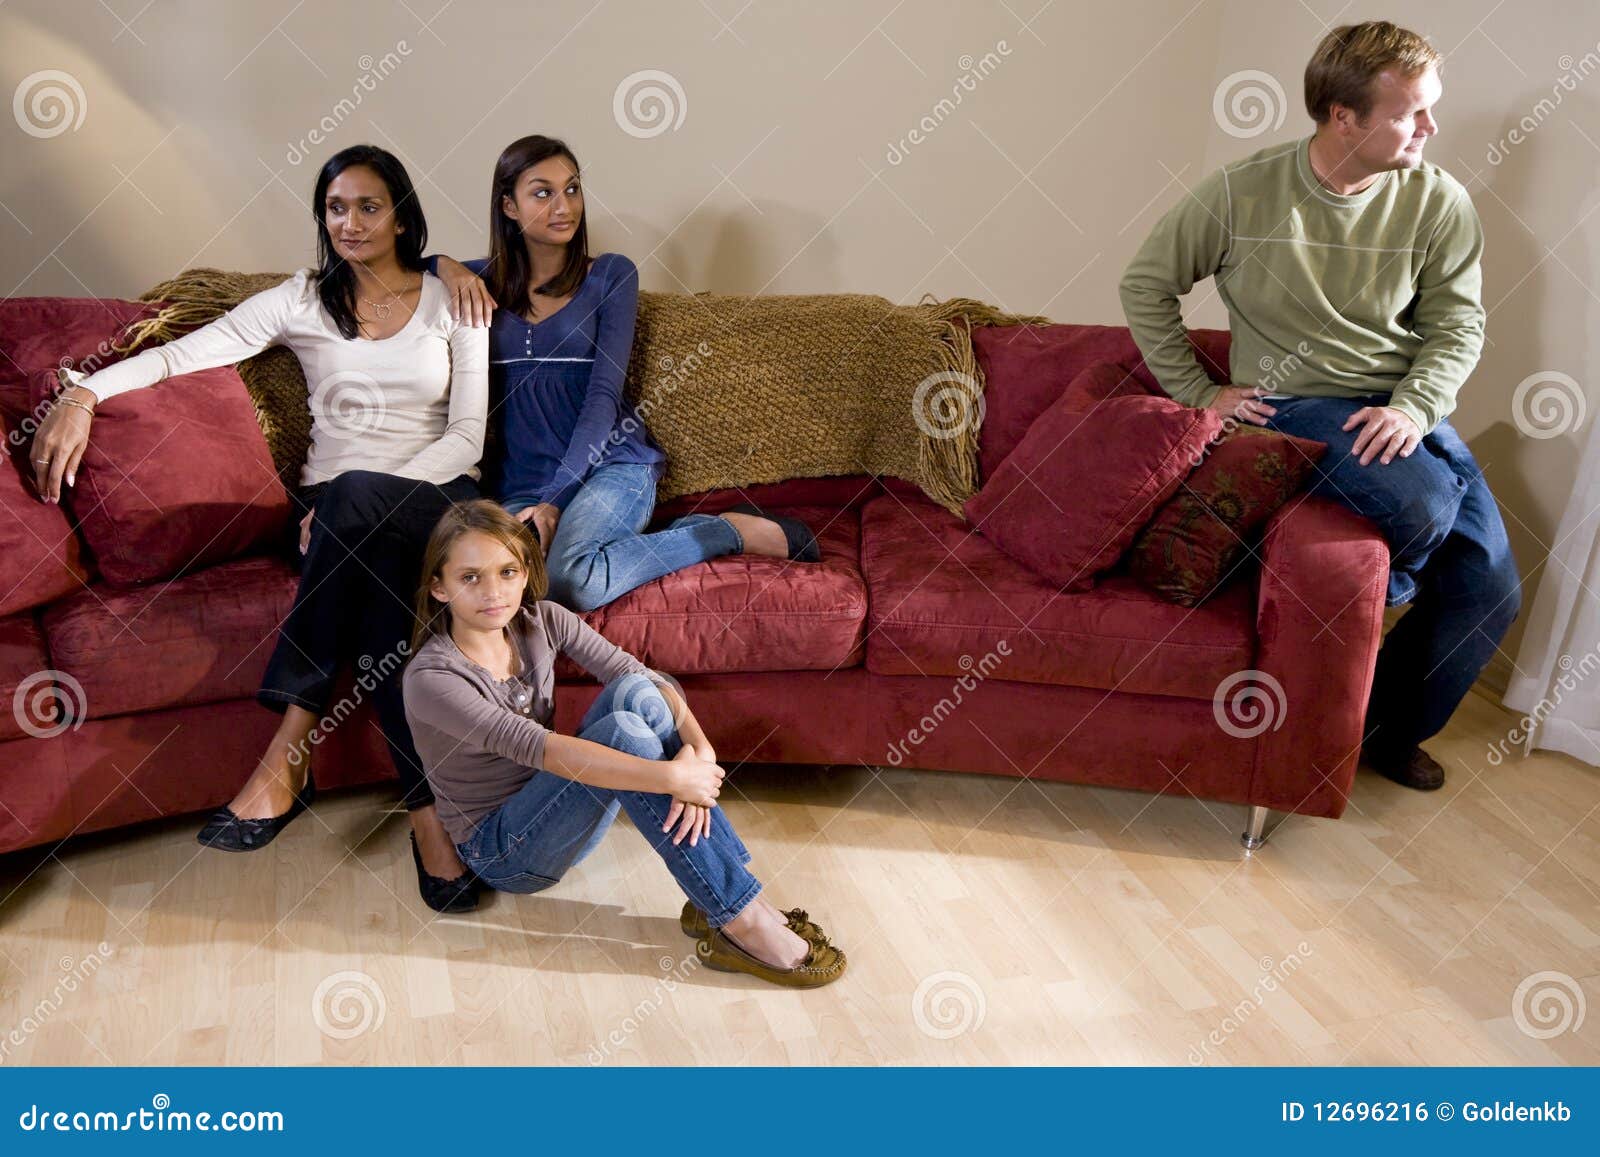 family on couch with father sitting apart